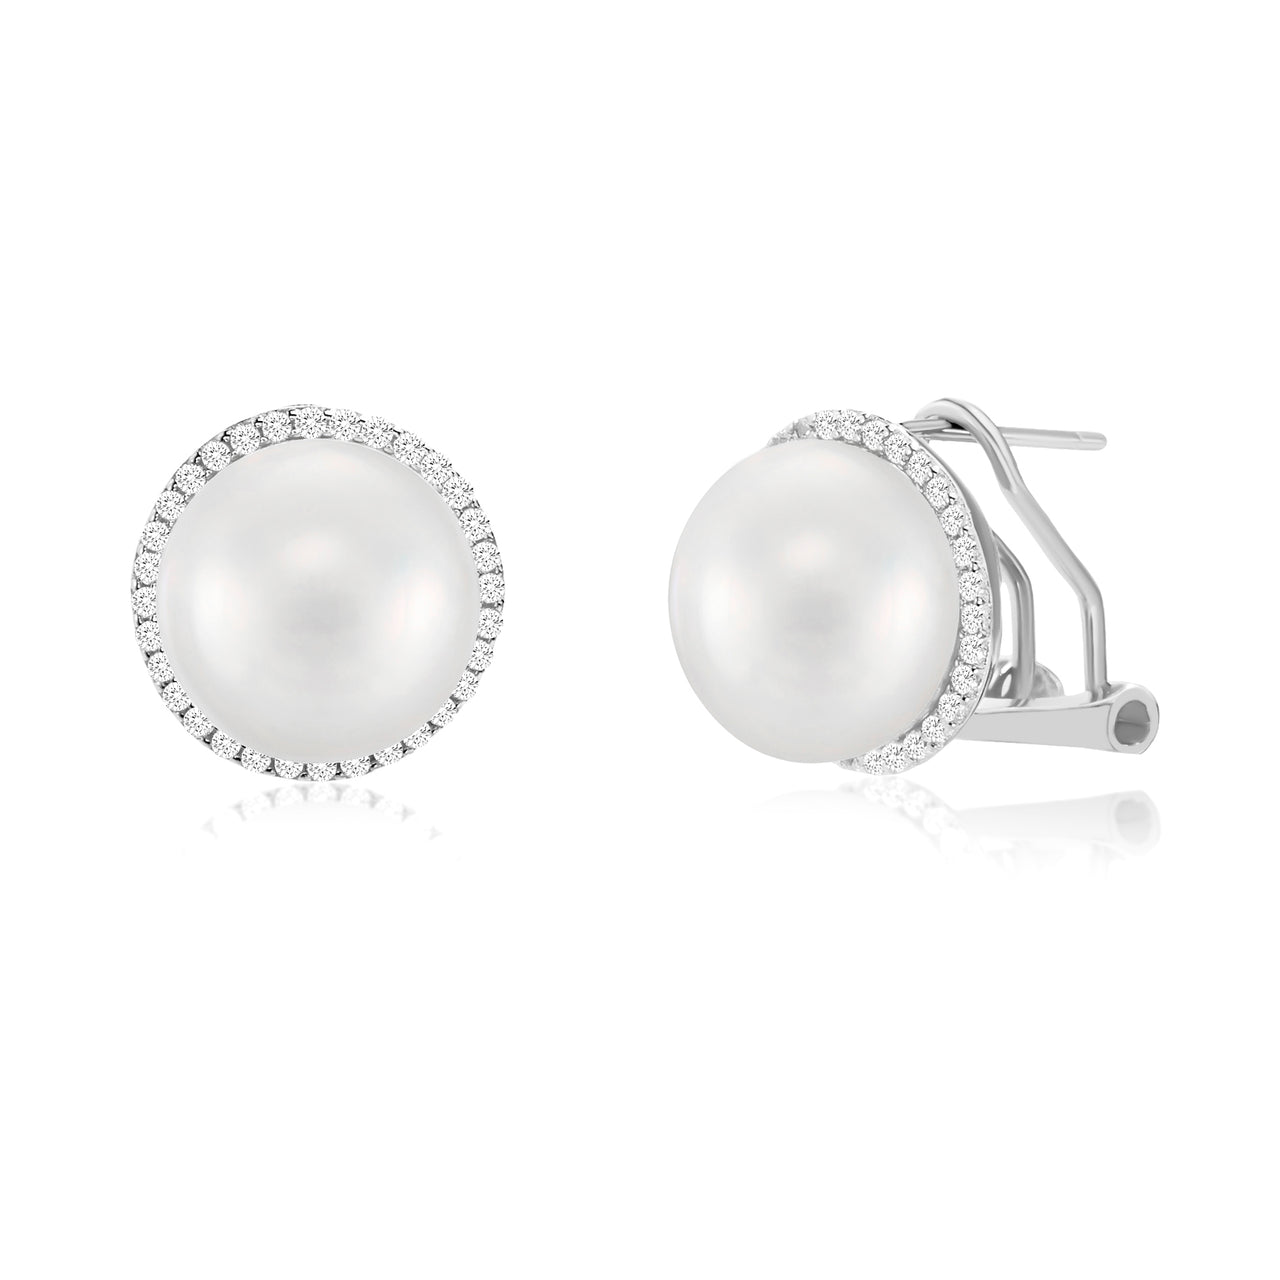 Lesa Michele Rhodium Plated Sterling Silver Cultured Freshwater Pearl Cubic Zirconia Earrings